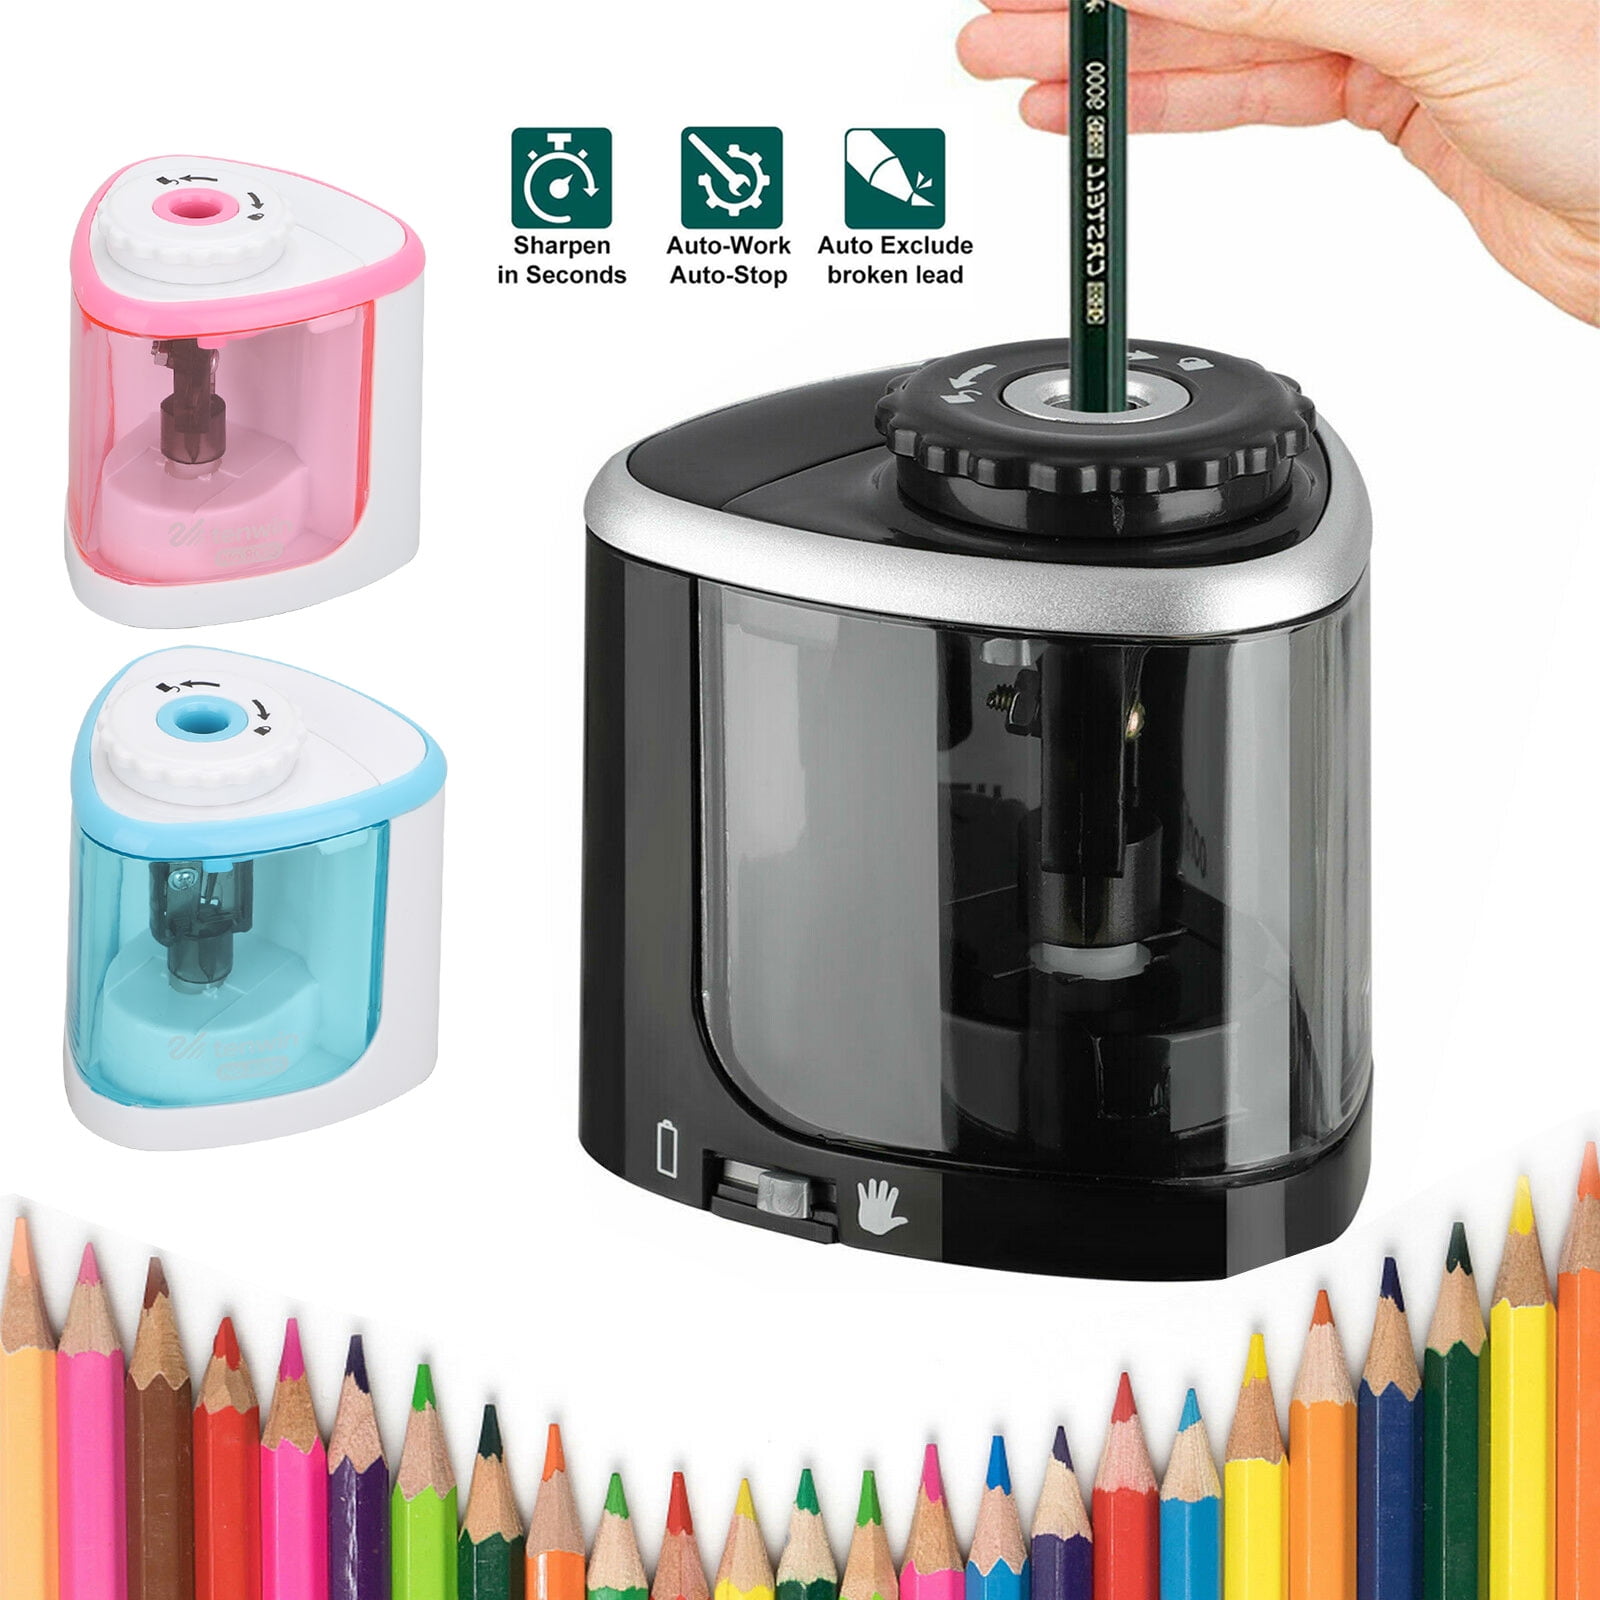 Pencil Sharpener 4 Free AA Batteries No Electronic Colored Pencil Sharpeners for Kids 2 & Drawing Pencils White Electric Art Pencil Sharpener Battery Powered Automatic Pencil Sharpener Portable 